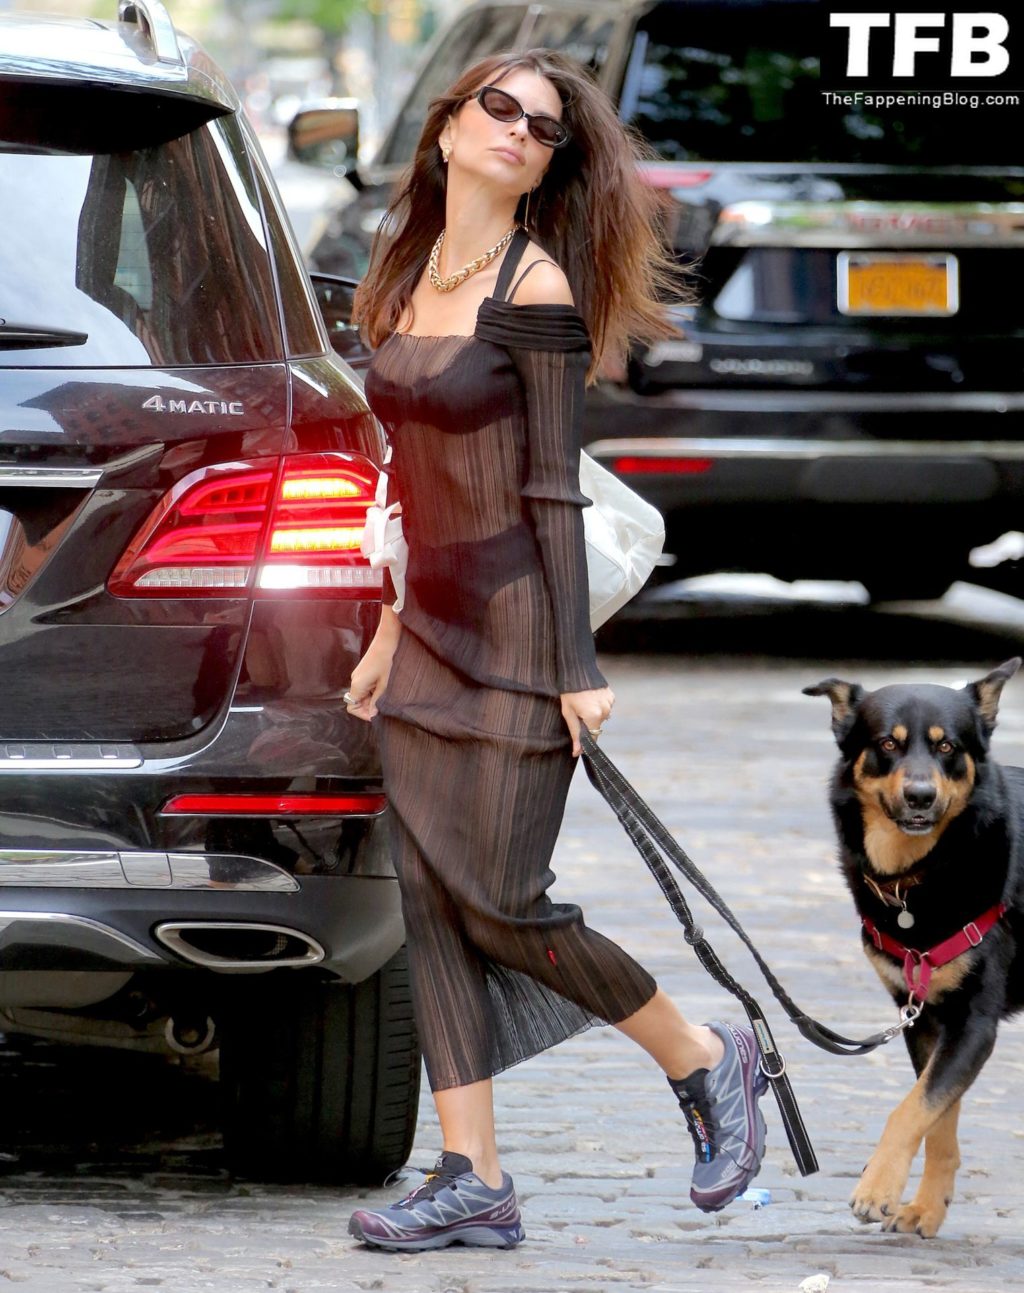 Emily Ratajkowski Sexy The Fappening Blog 19 1 1024x1293 - Emily Ratajkowski Bares It All in a See-Through Dress While Out Walking Her Dog in New York (33 Photos)